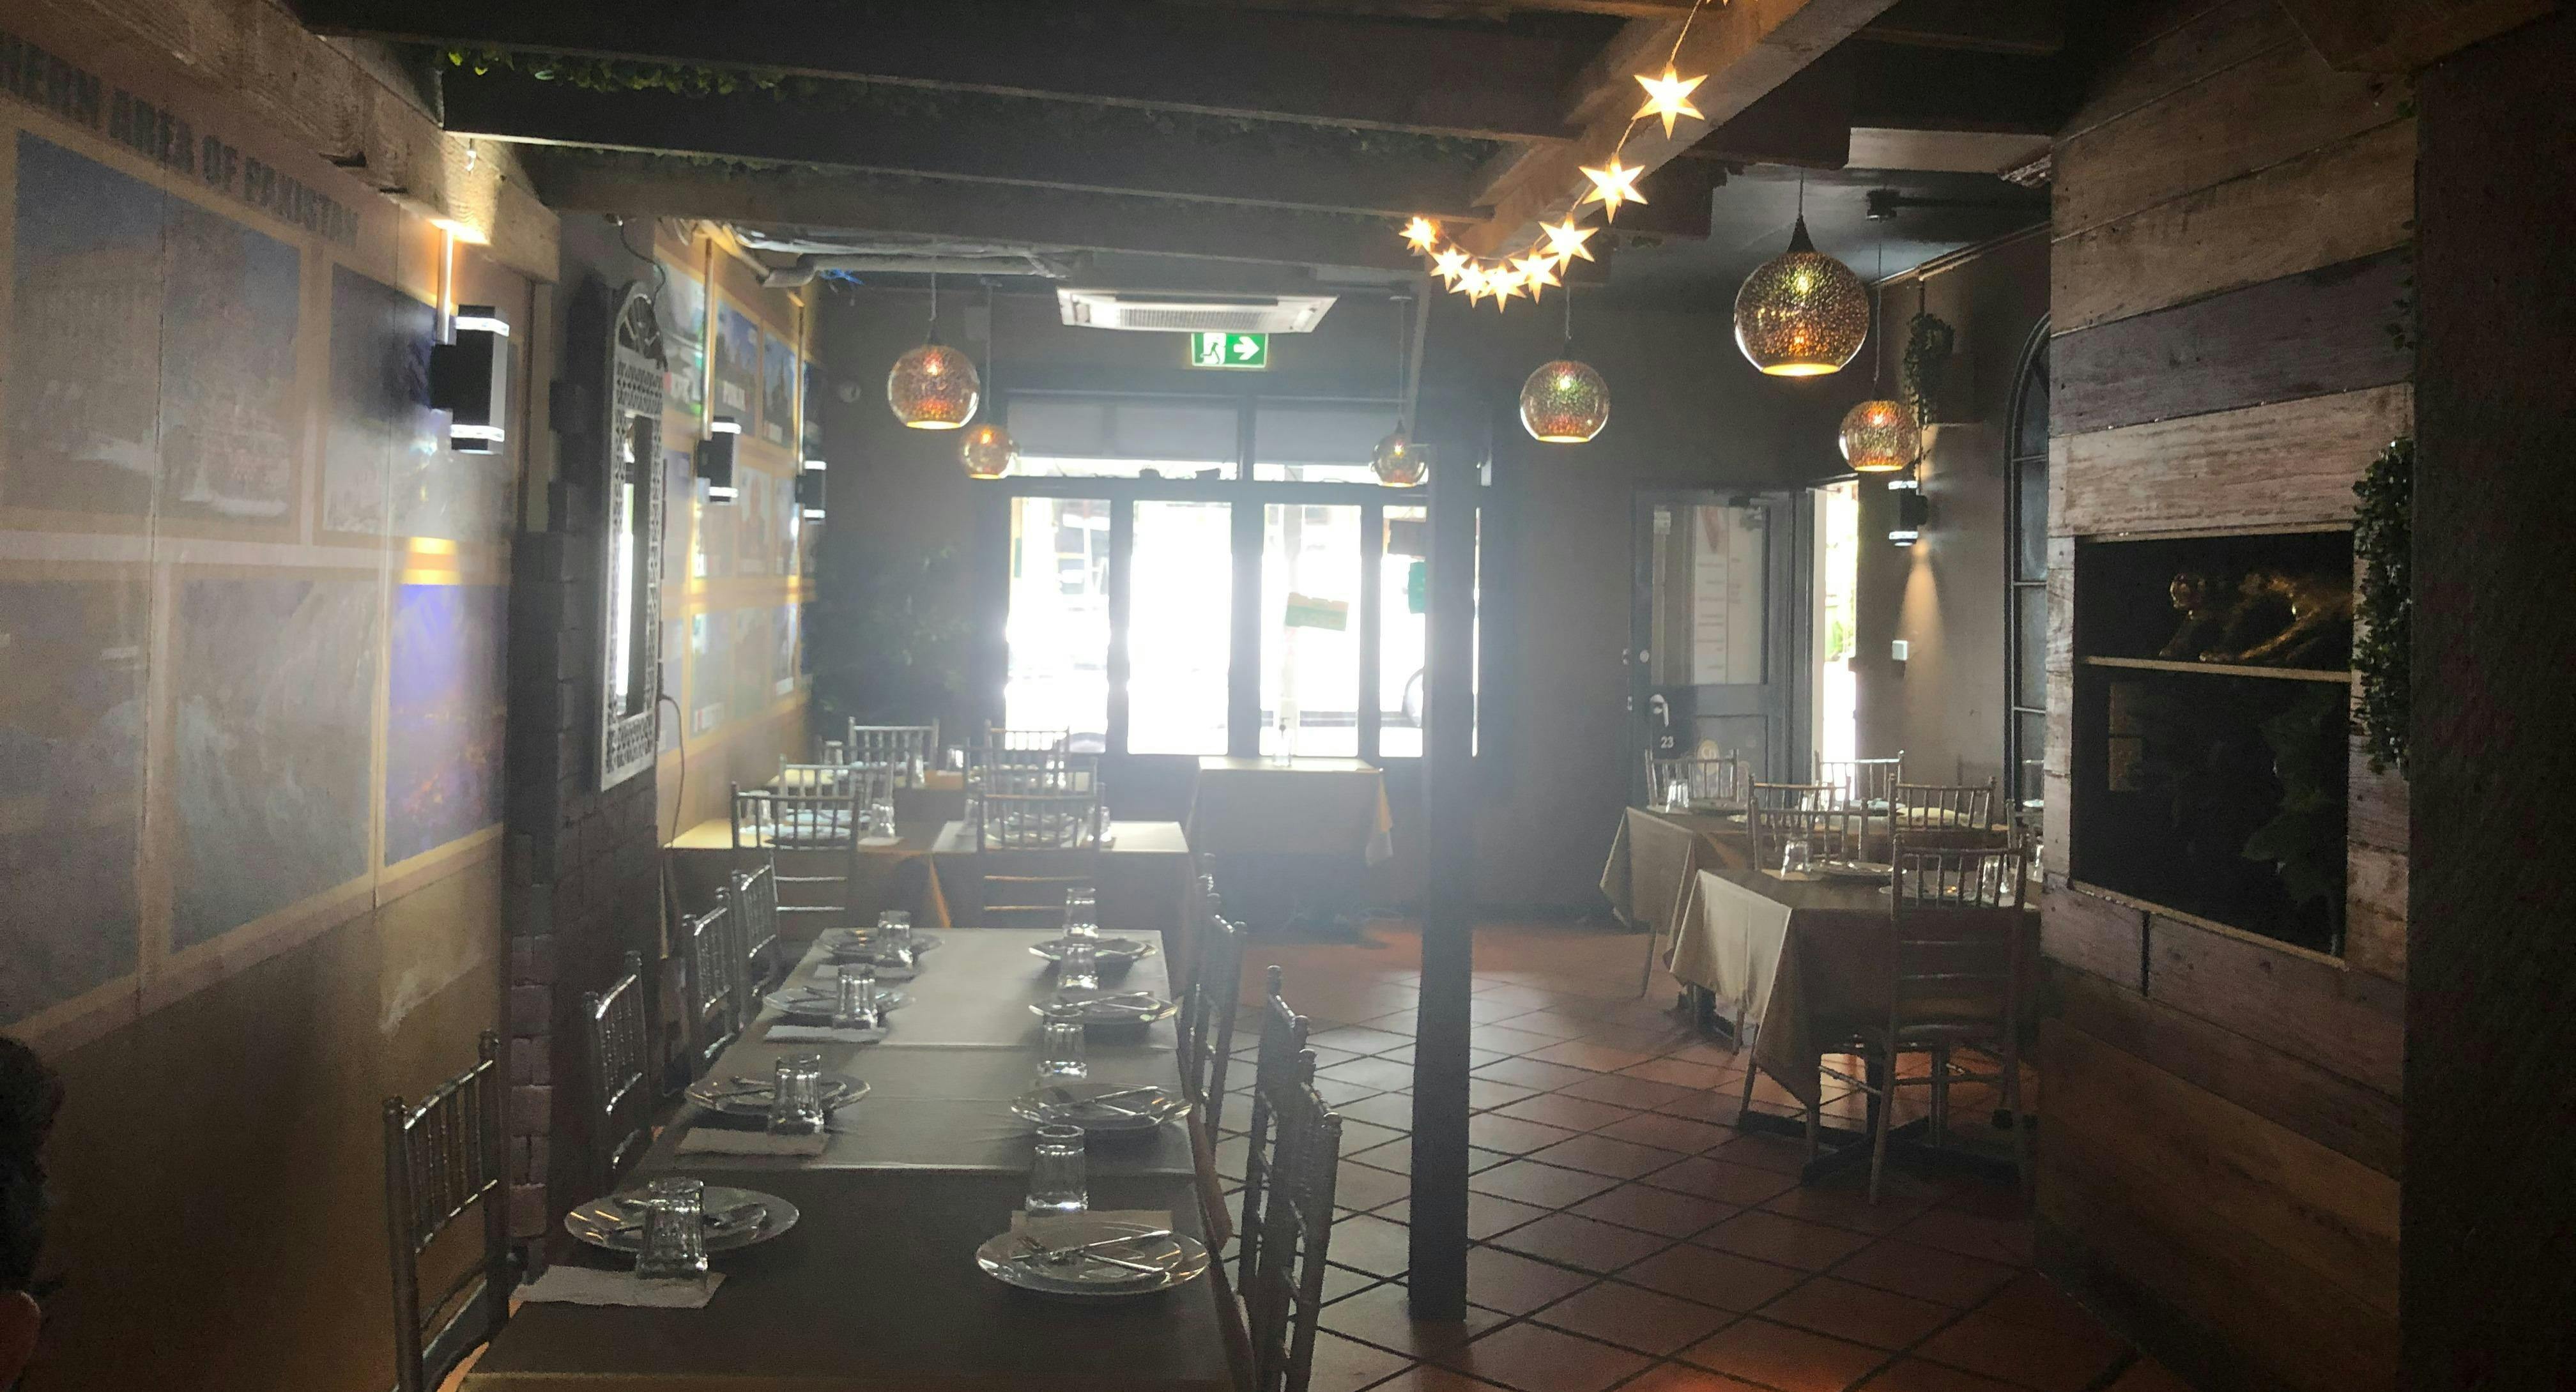 Photo of restaurant Sultans Palace in Glebe, Sydney